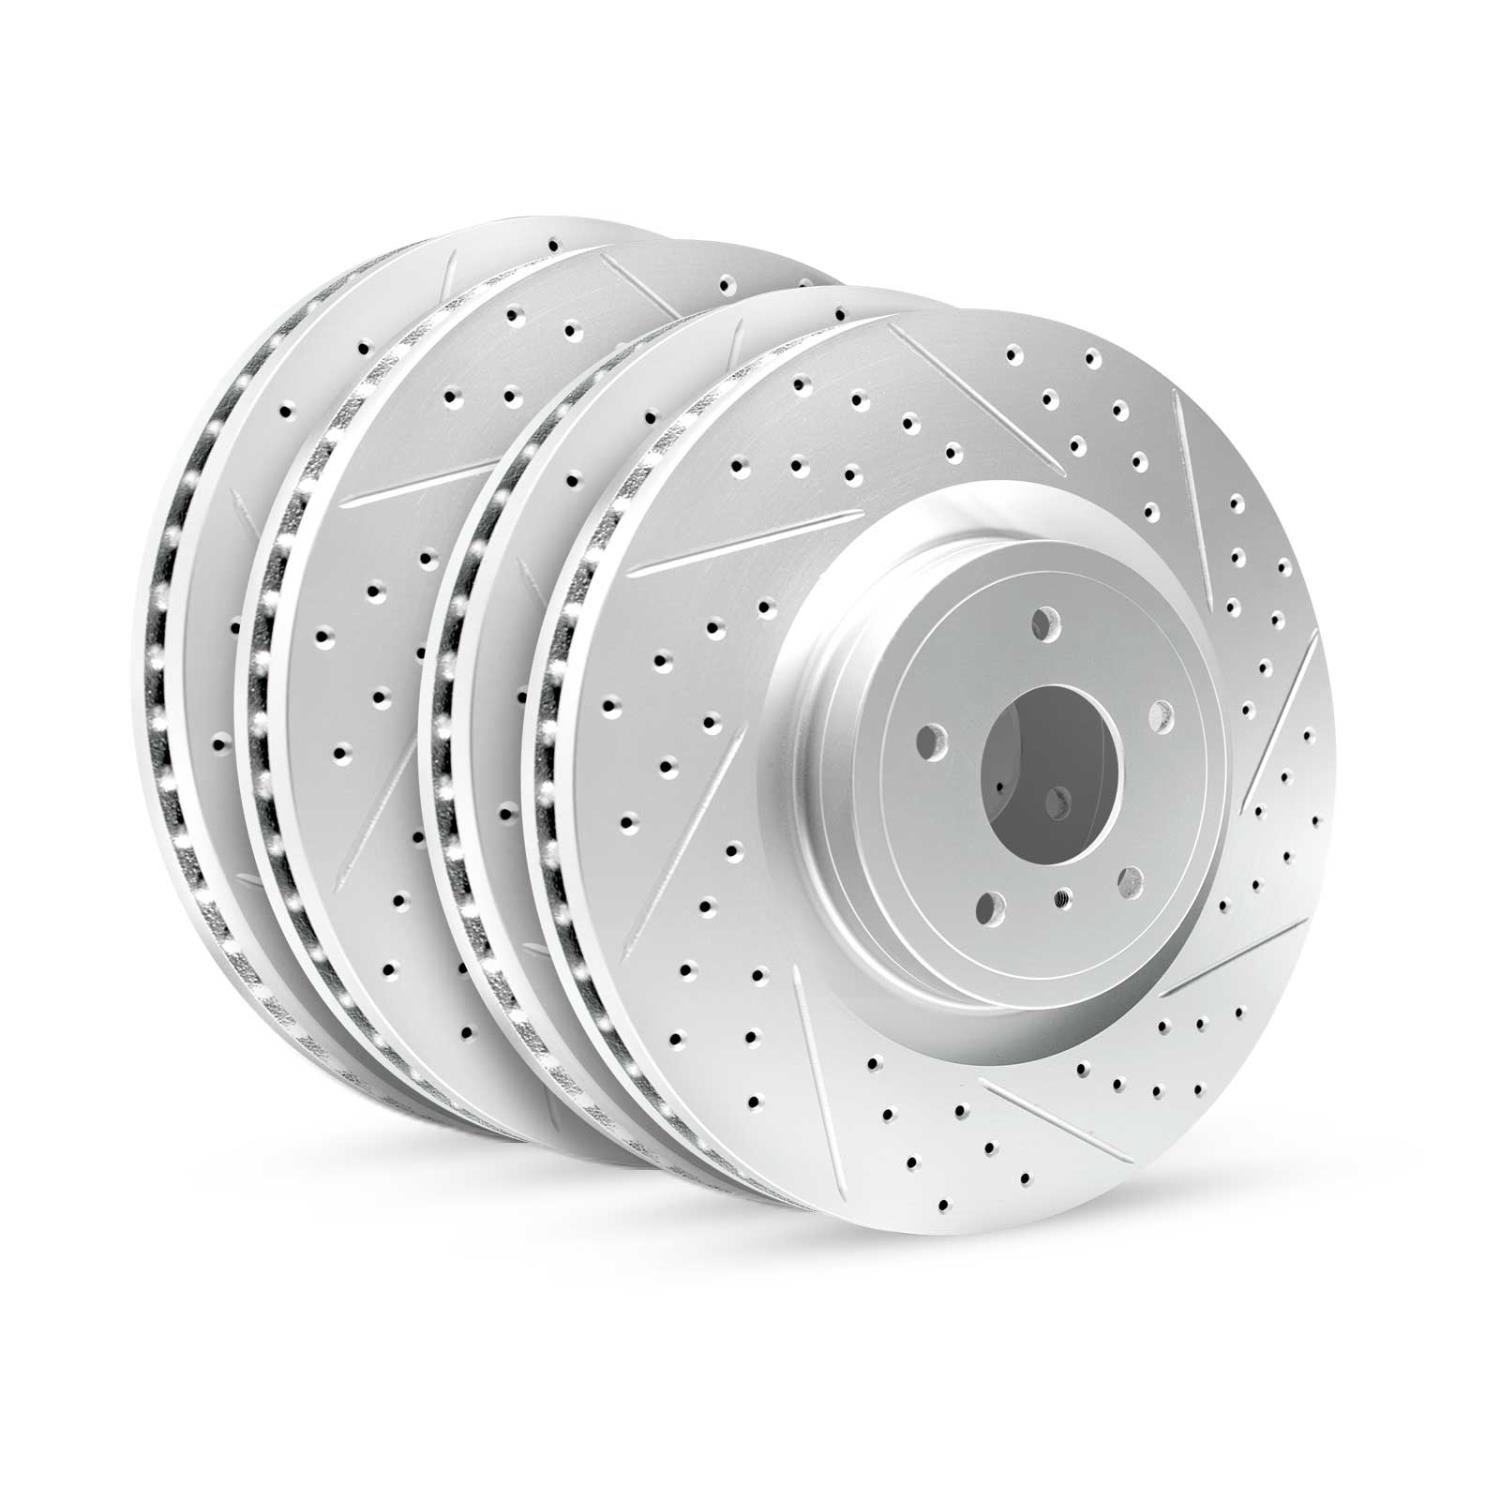 GEO-Carbon Drilled & Slotted Brake Rotor Set, Fits Select Kia/Hyundai/Genesis, Position: Front